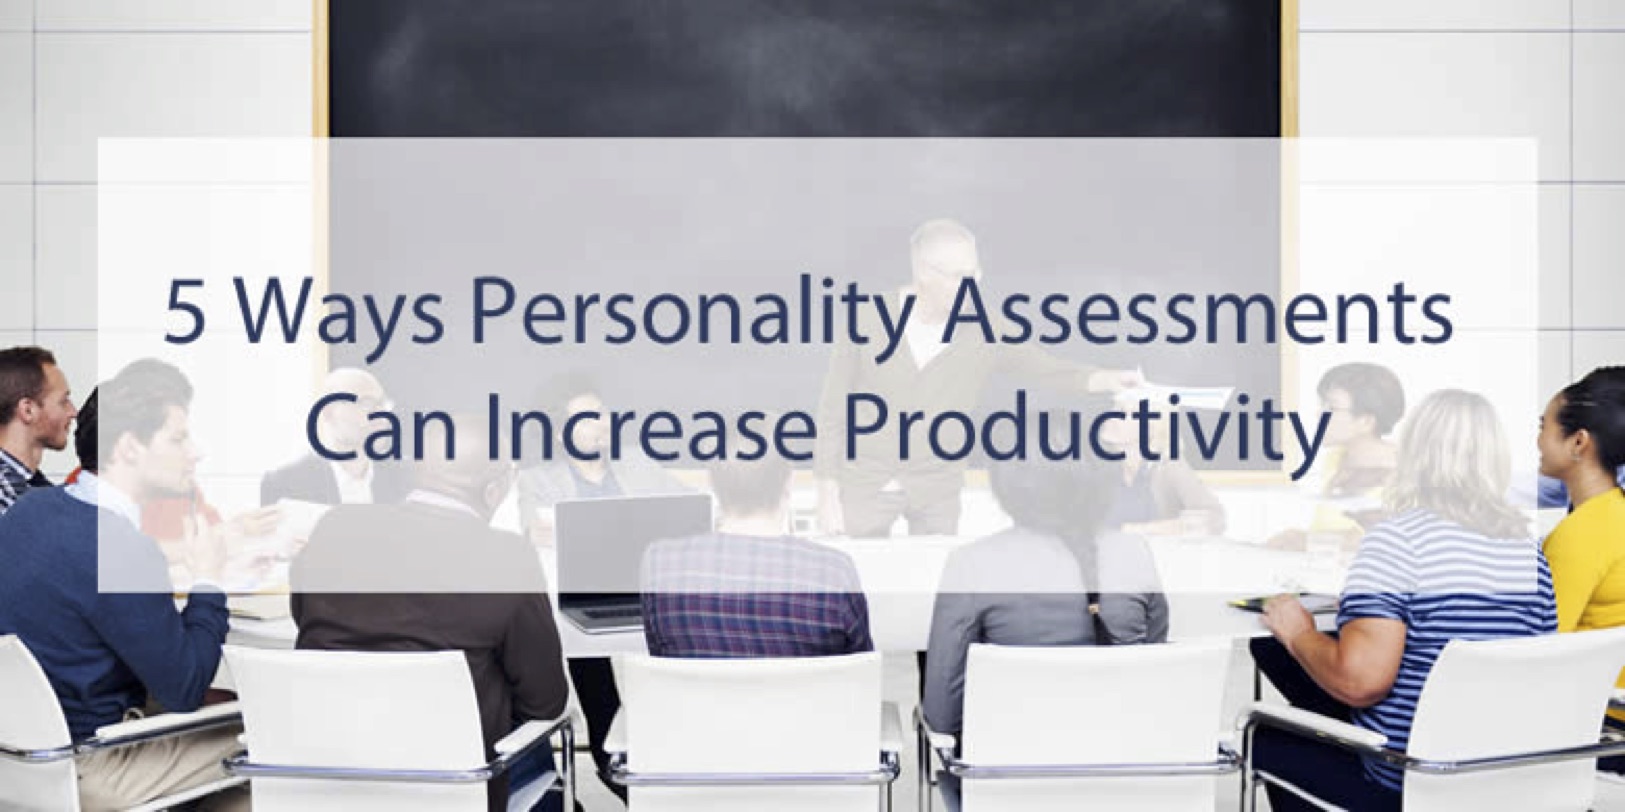 5 Ways Personality Assessments Can Increase Productivity